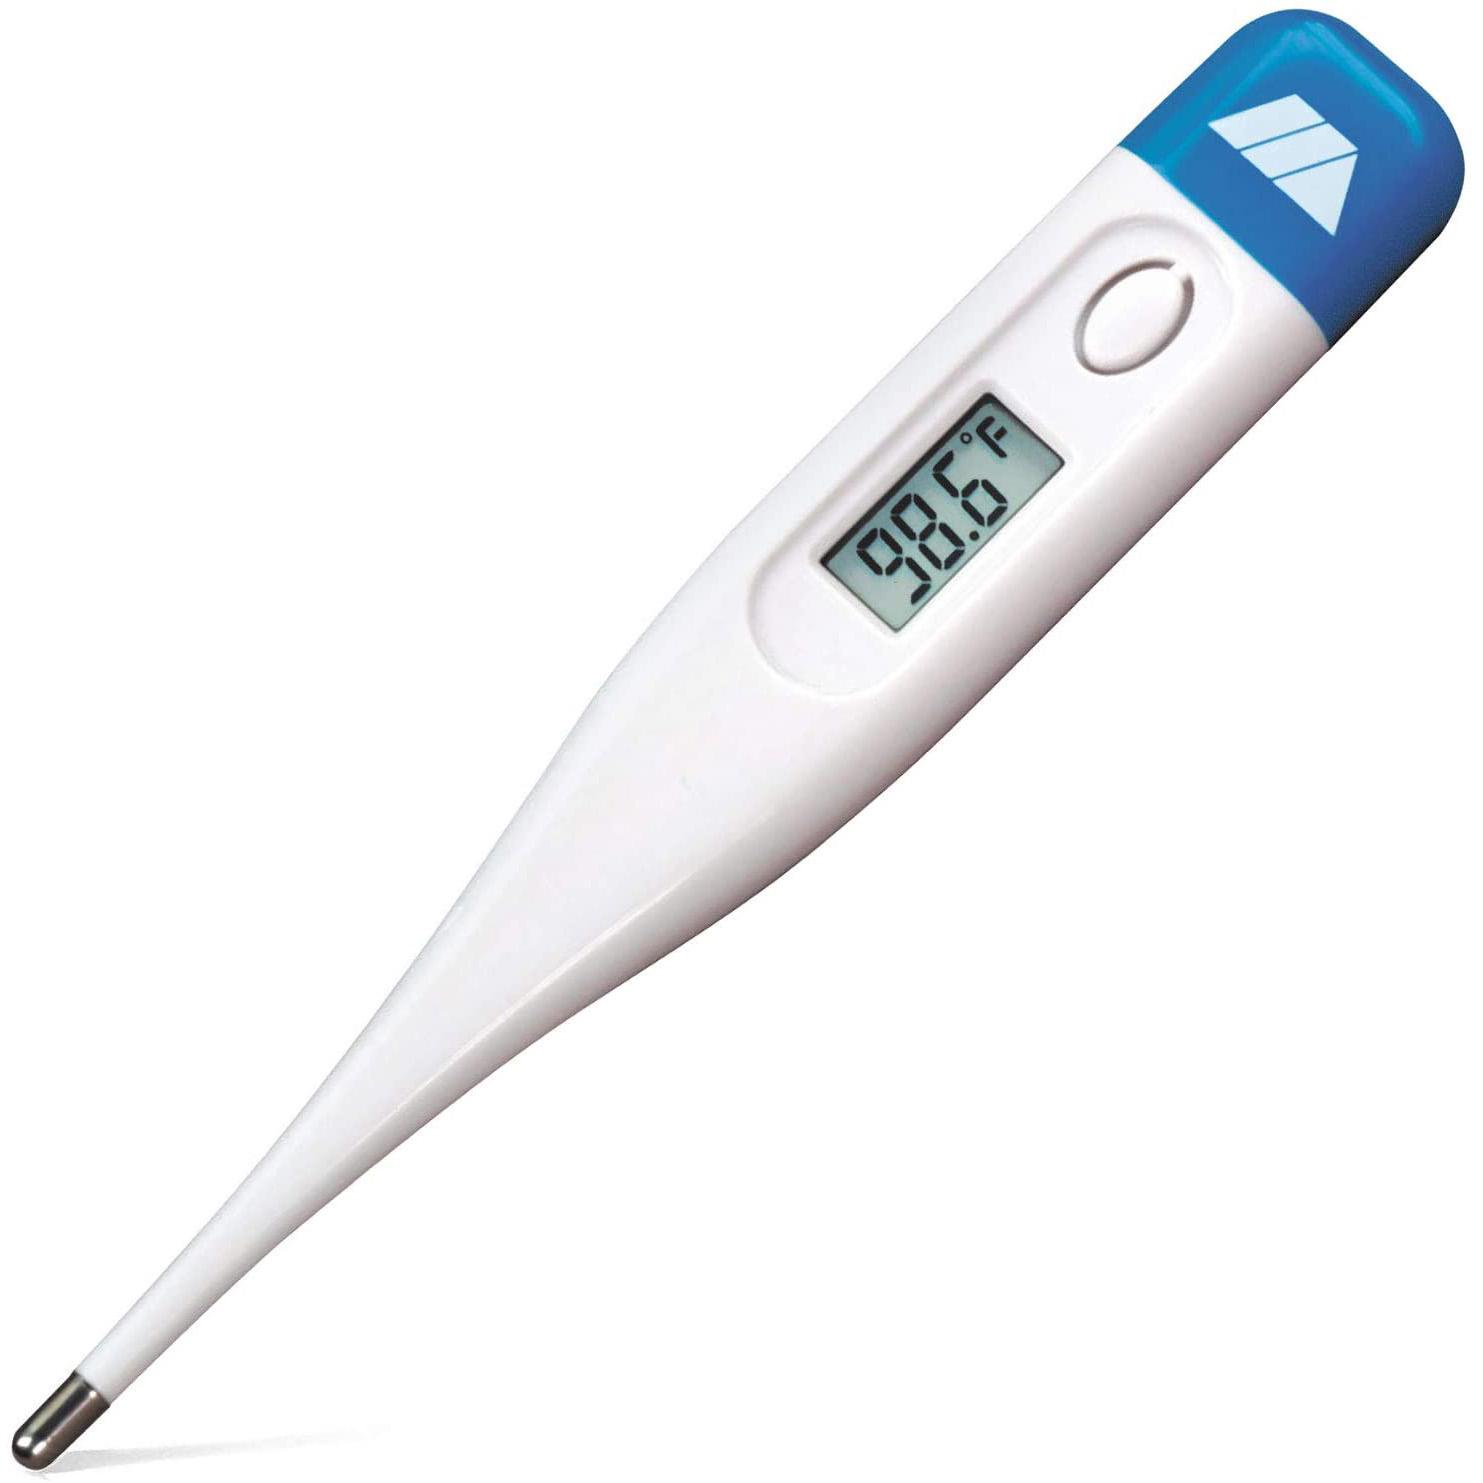 Mabis Digital 60 Second Oral Thermometer for $2.88